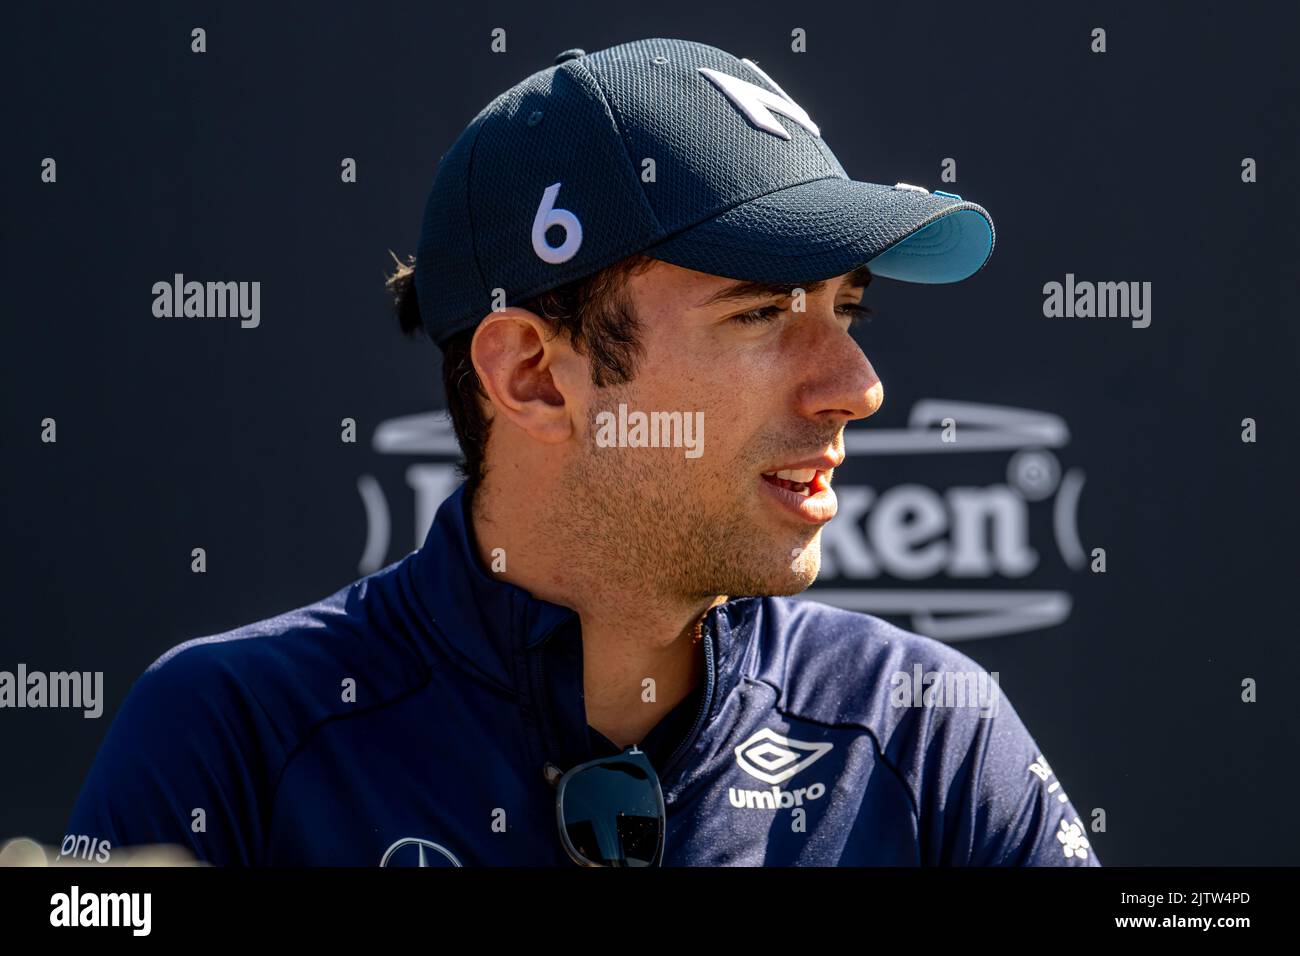 Zandvoort, Netherlands, 01st Sep 2022, Nicholas Latifi, from Canada competes for Williams Racing. The build up, round 15 of the 2022 Formula 1 championship. Credit: Michael Potts/Alamy Live News Stock Photo